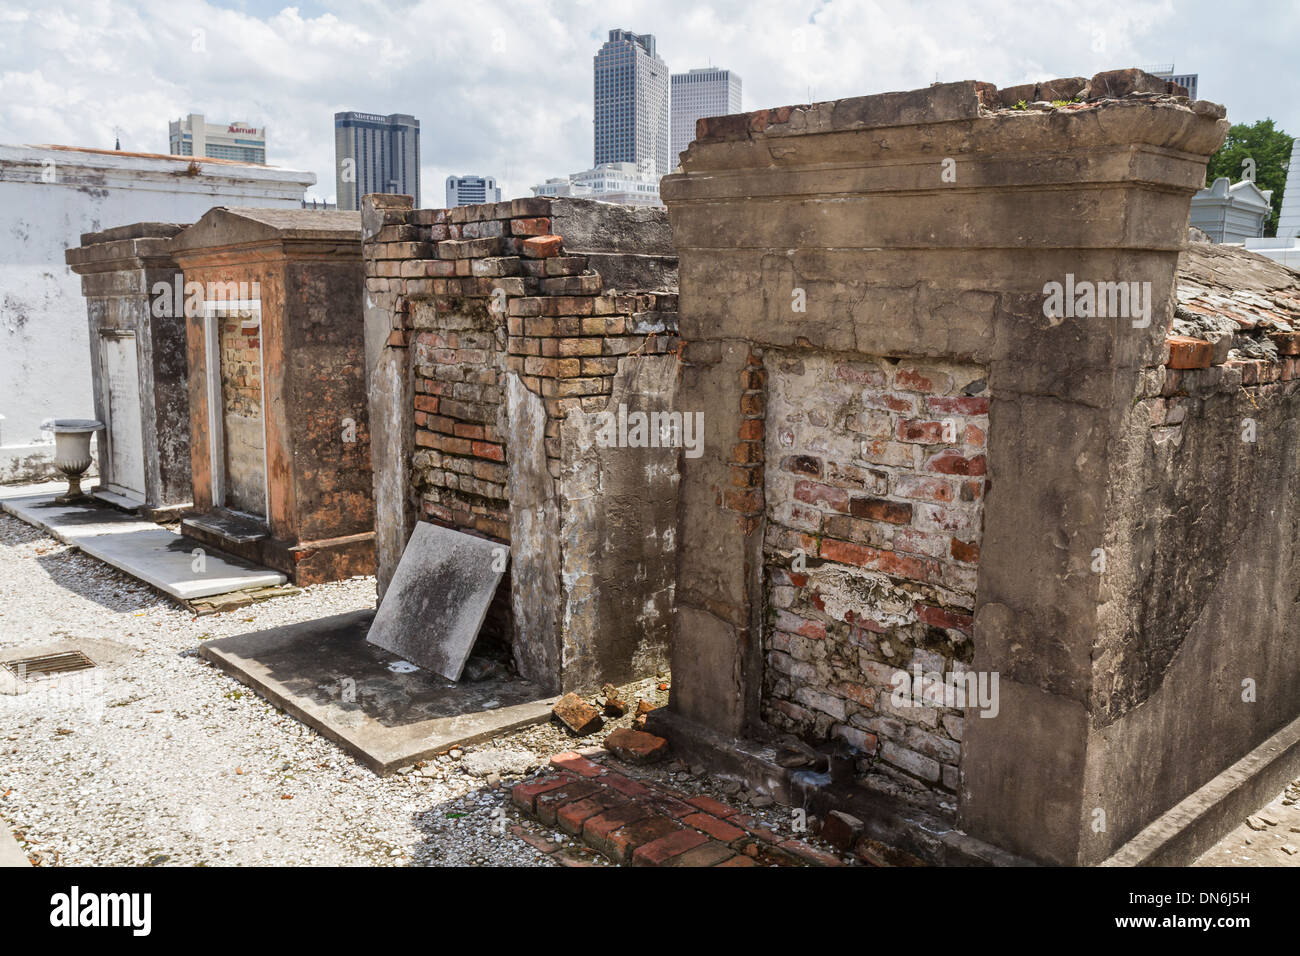 Row of crumbling brick tombs in St. Louis Cemetery in the Treme district of New Orleans Stock Photo